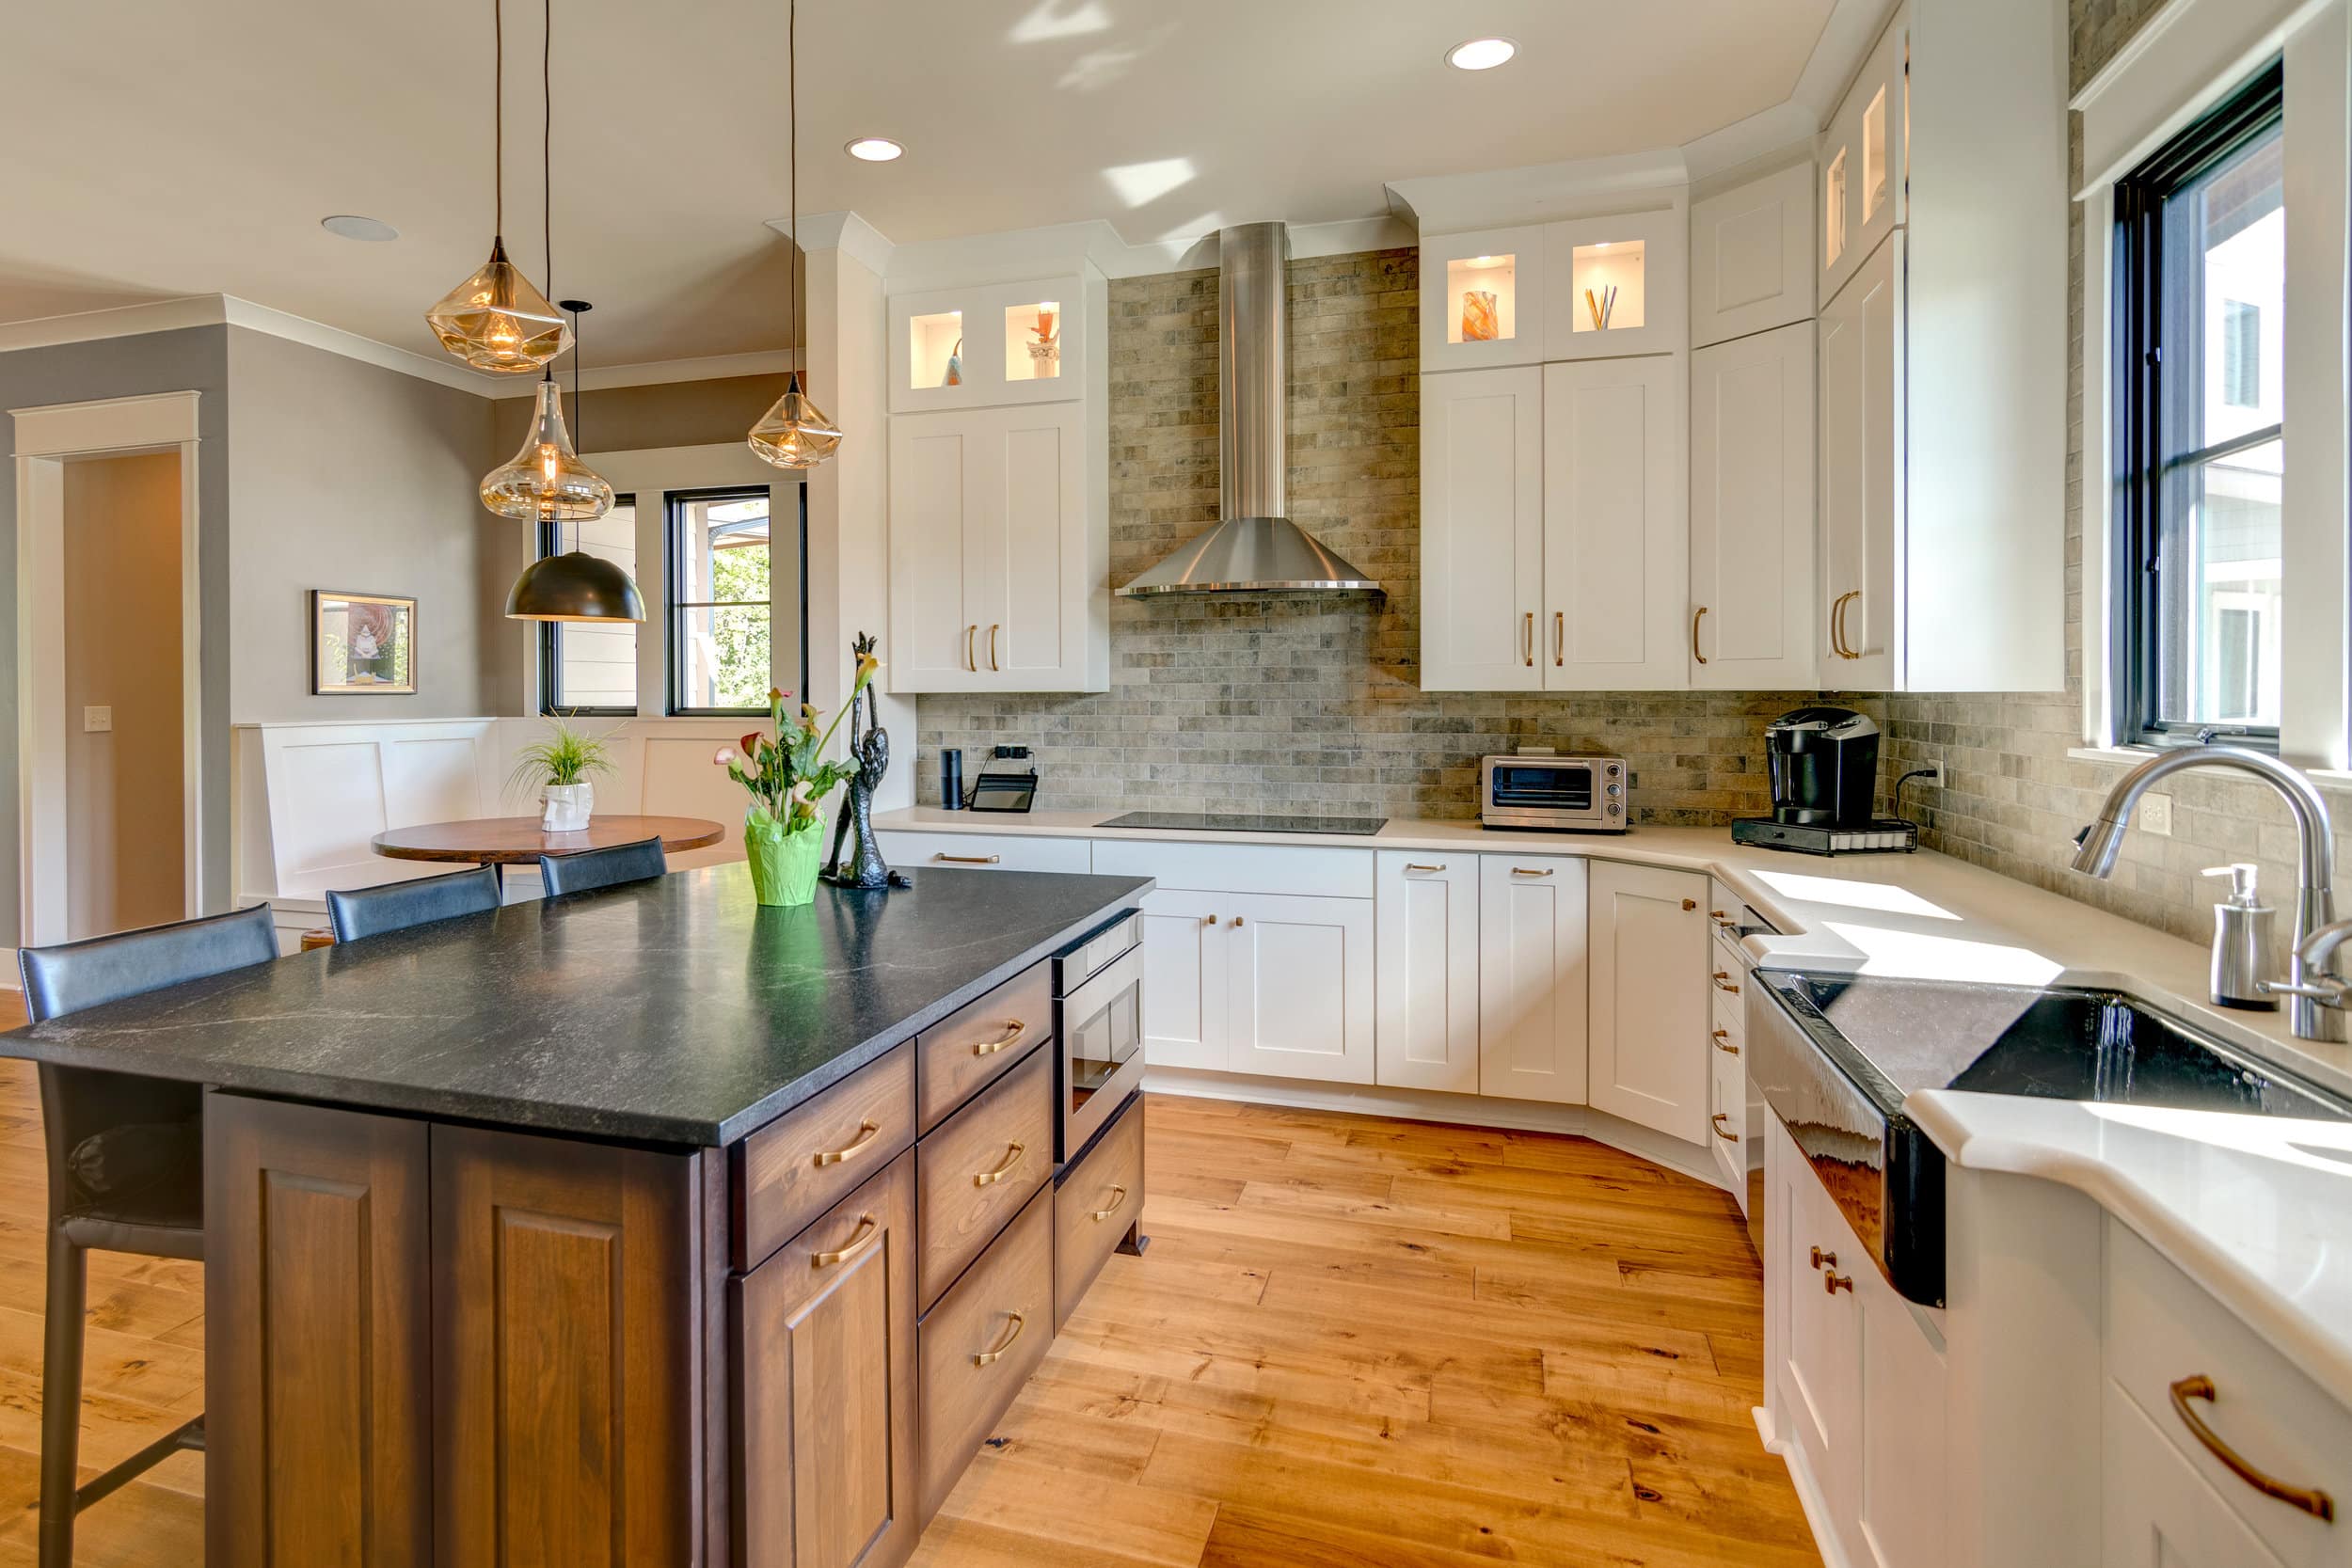 A kitchen with hardwood floors and a center island, designed by a custom home builder in Fishers Indiana.